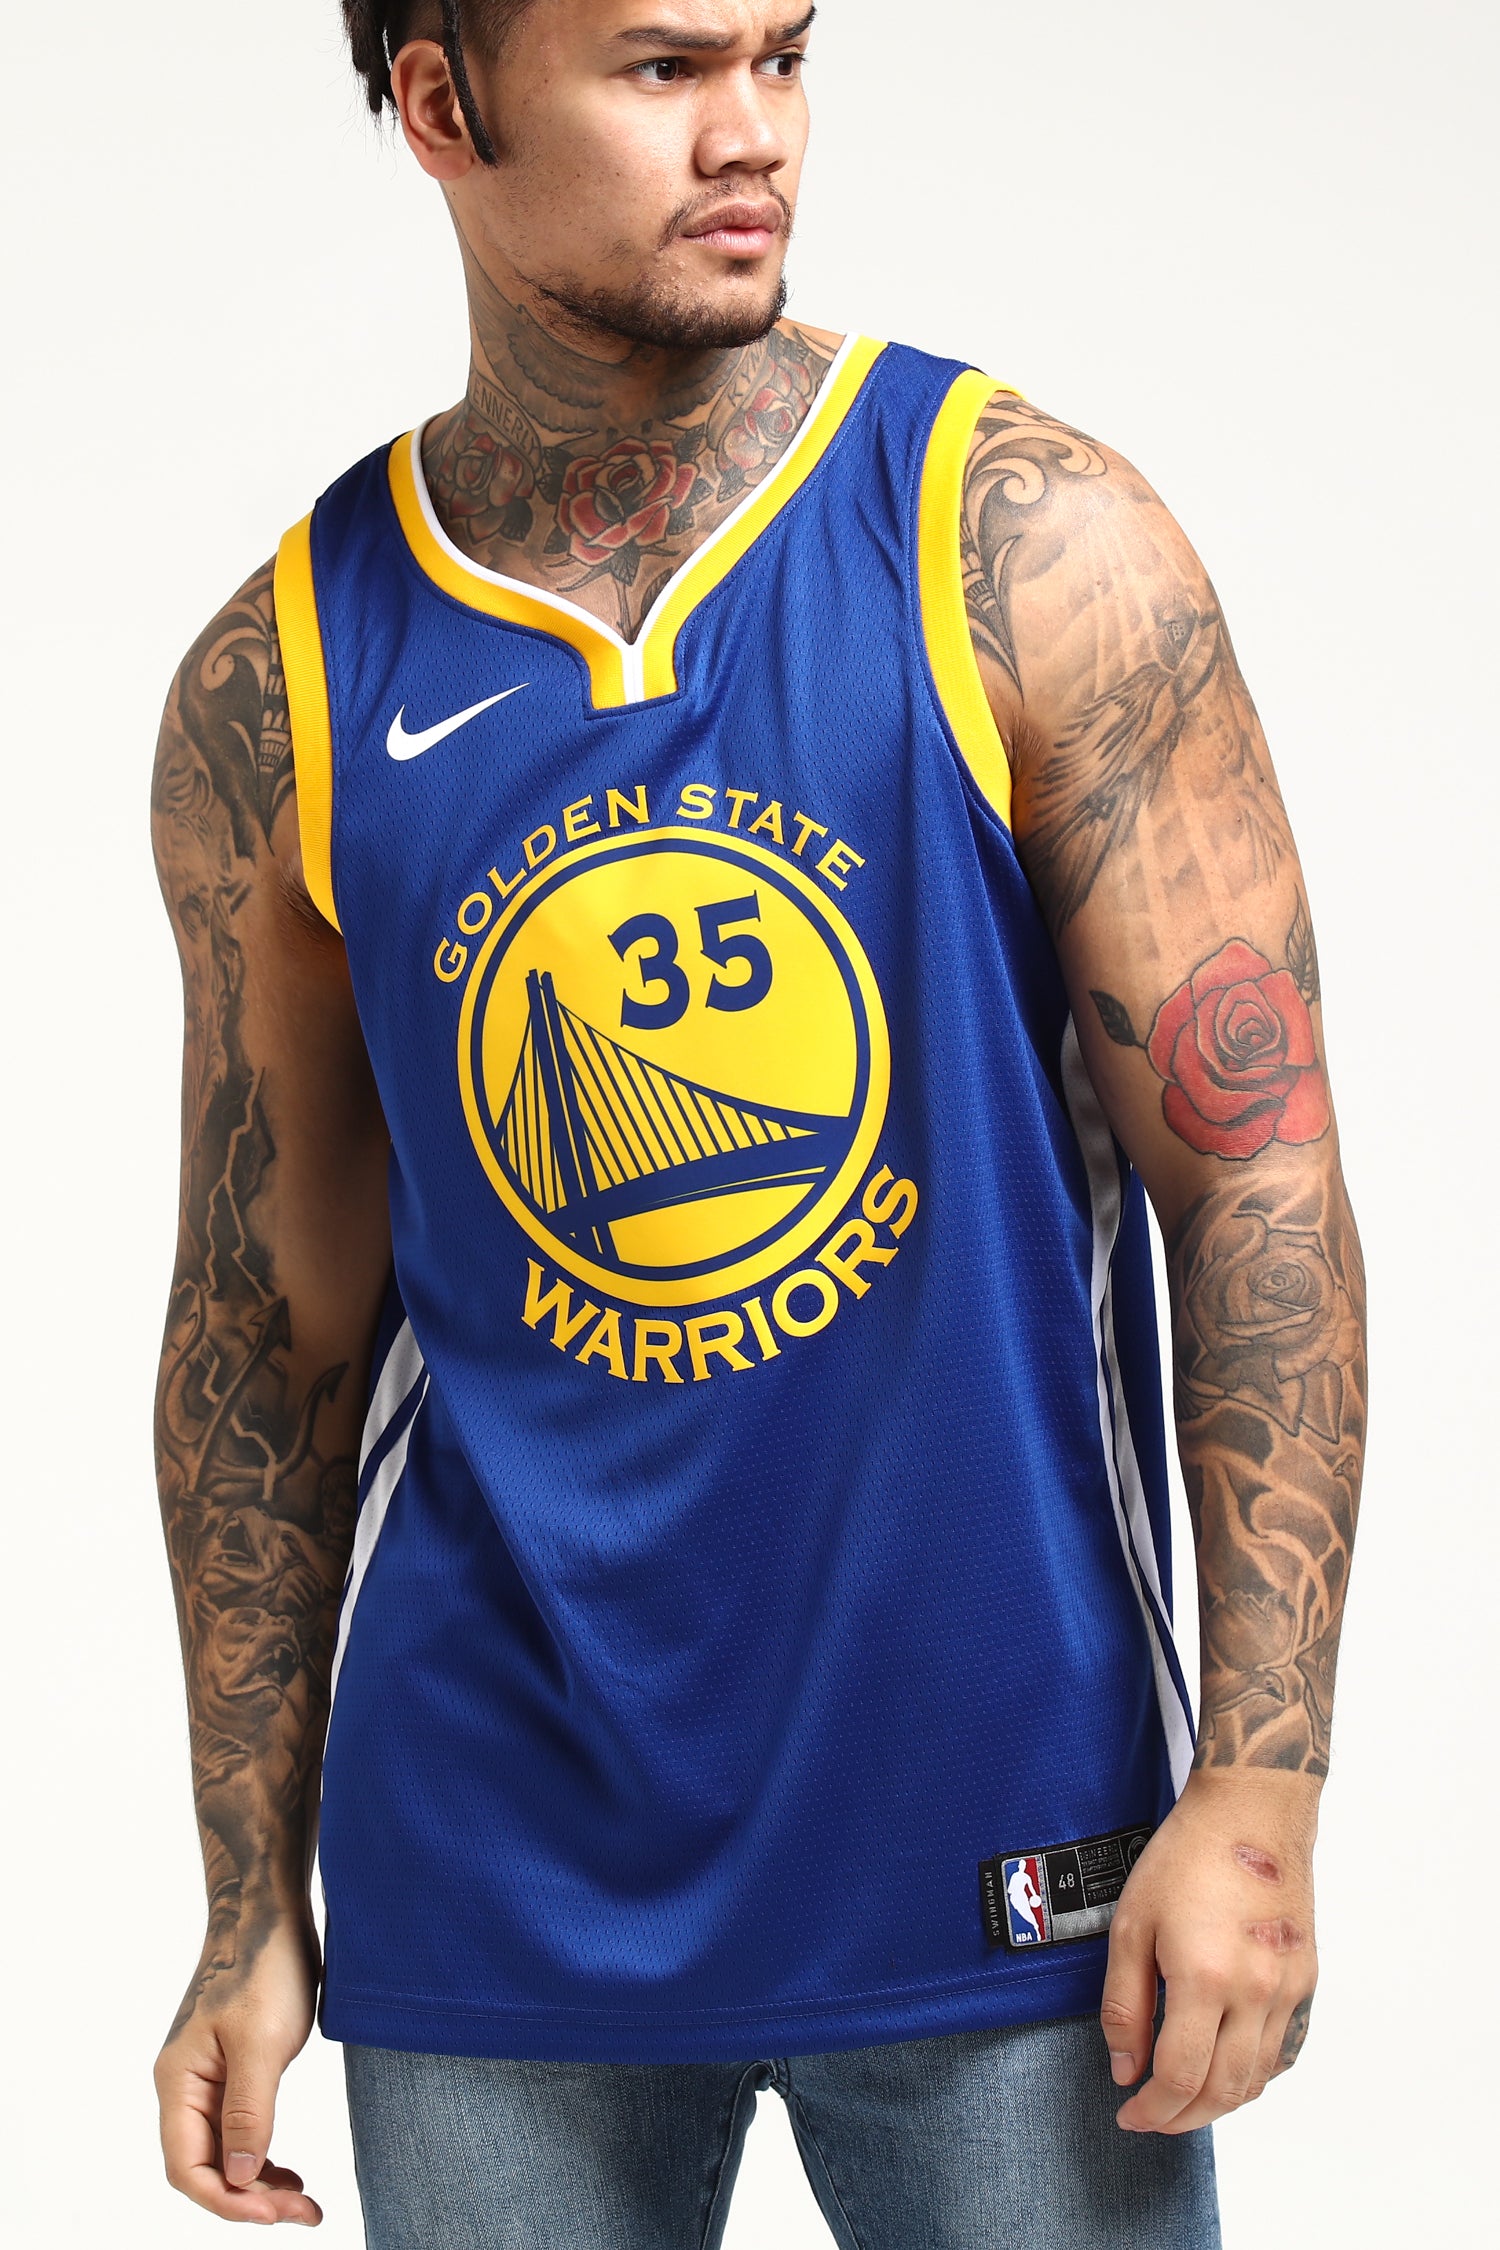 kevin durant warriors jersey white